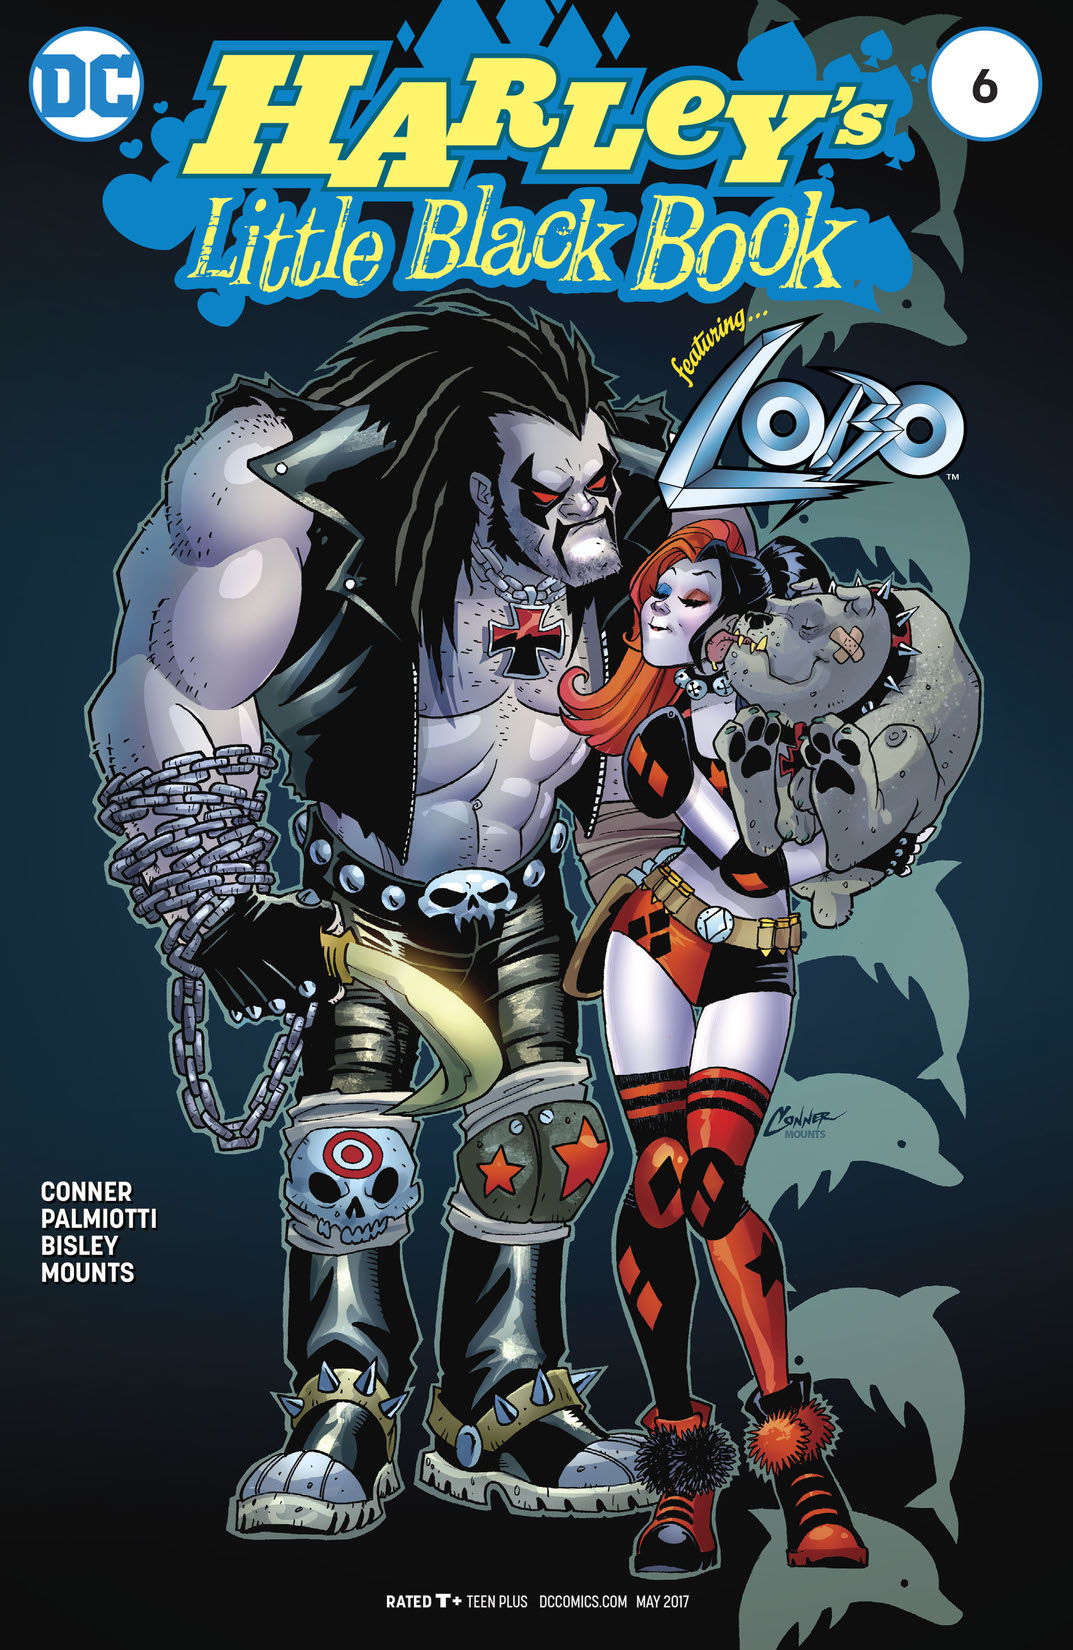 Harley's Little Black Book #6 preview images